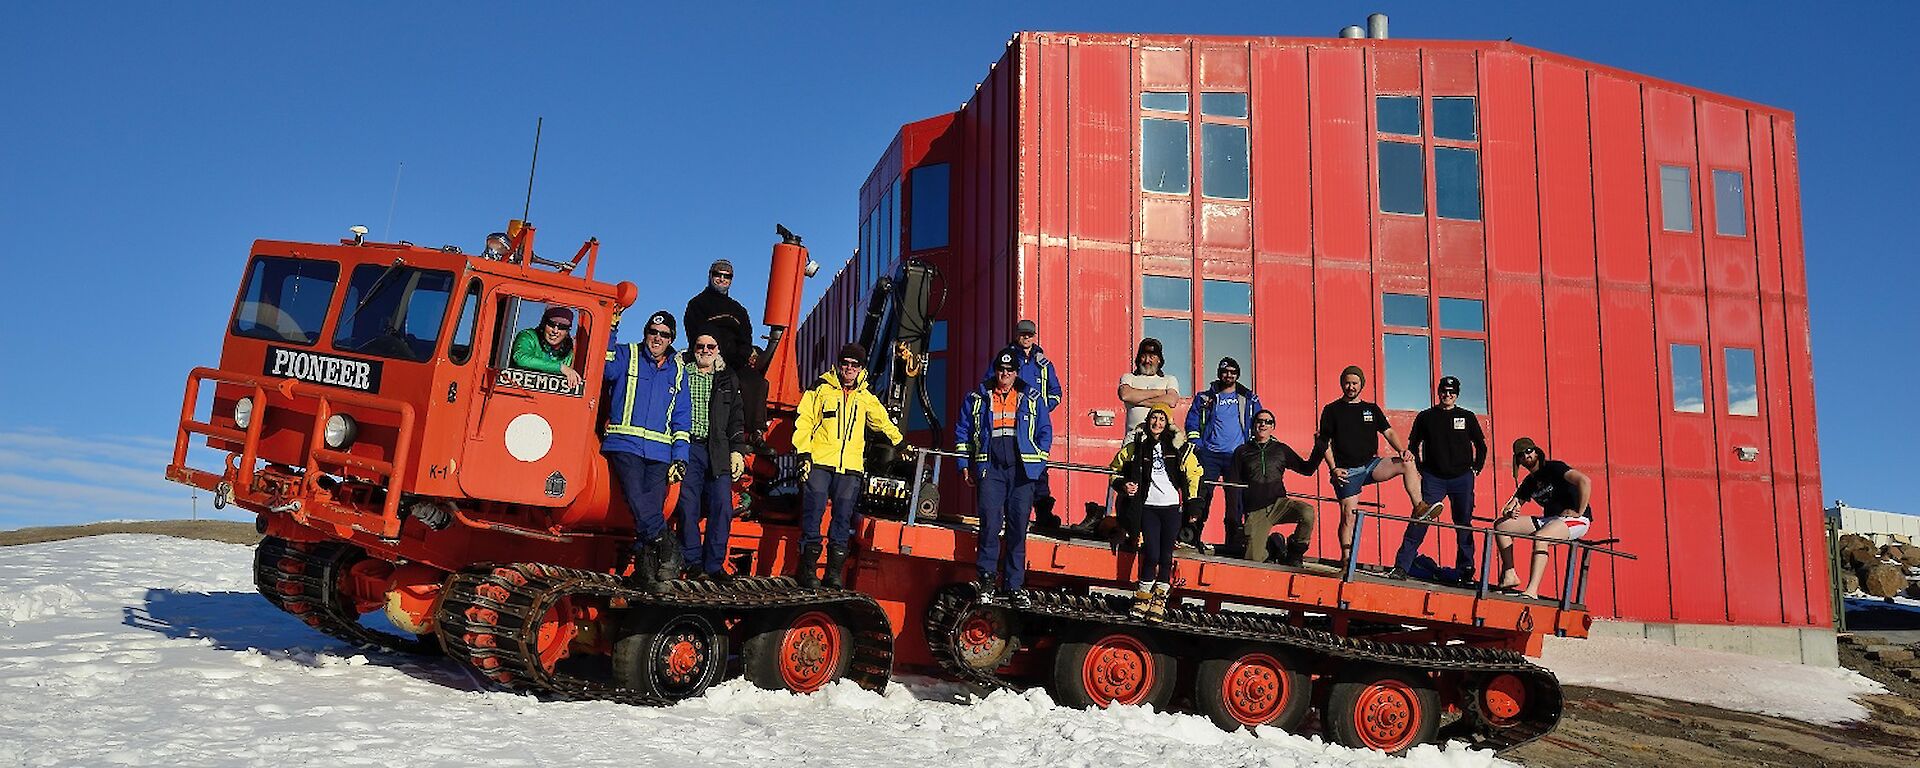 A large red over snow vehicle holds 14 expeditioners posing for a self timed photo in front of a large red shed and blue sky